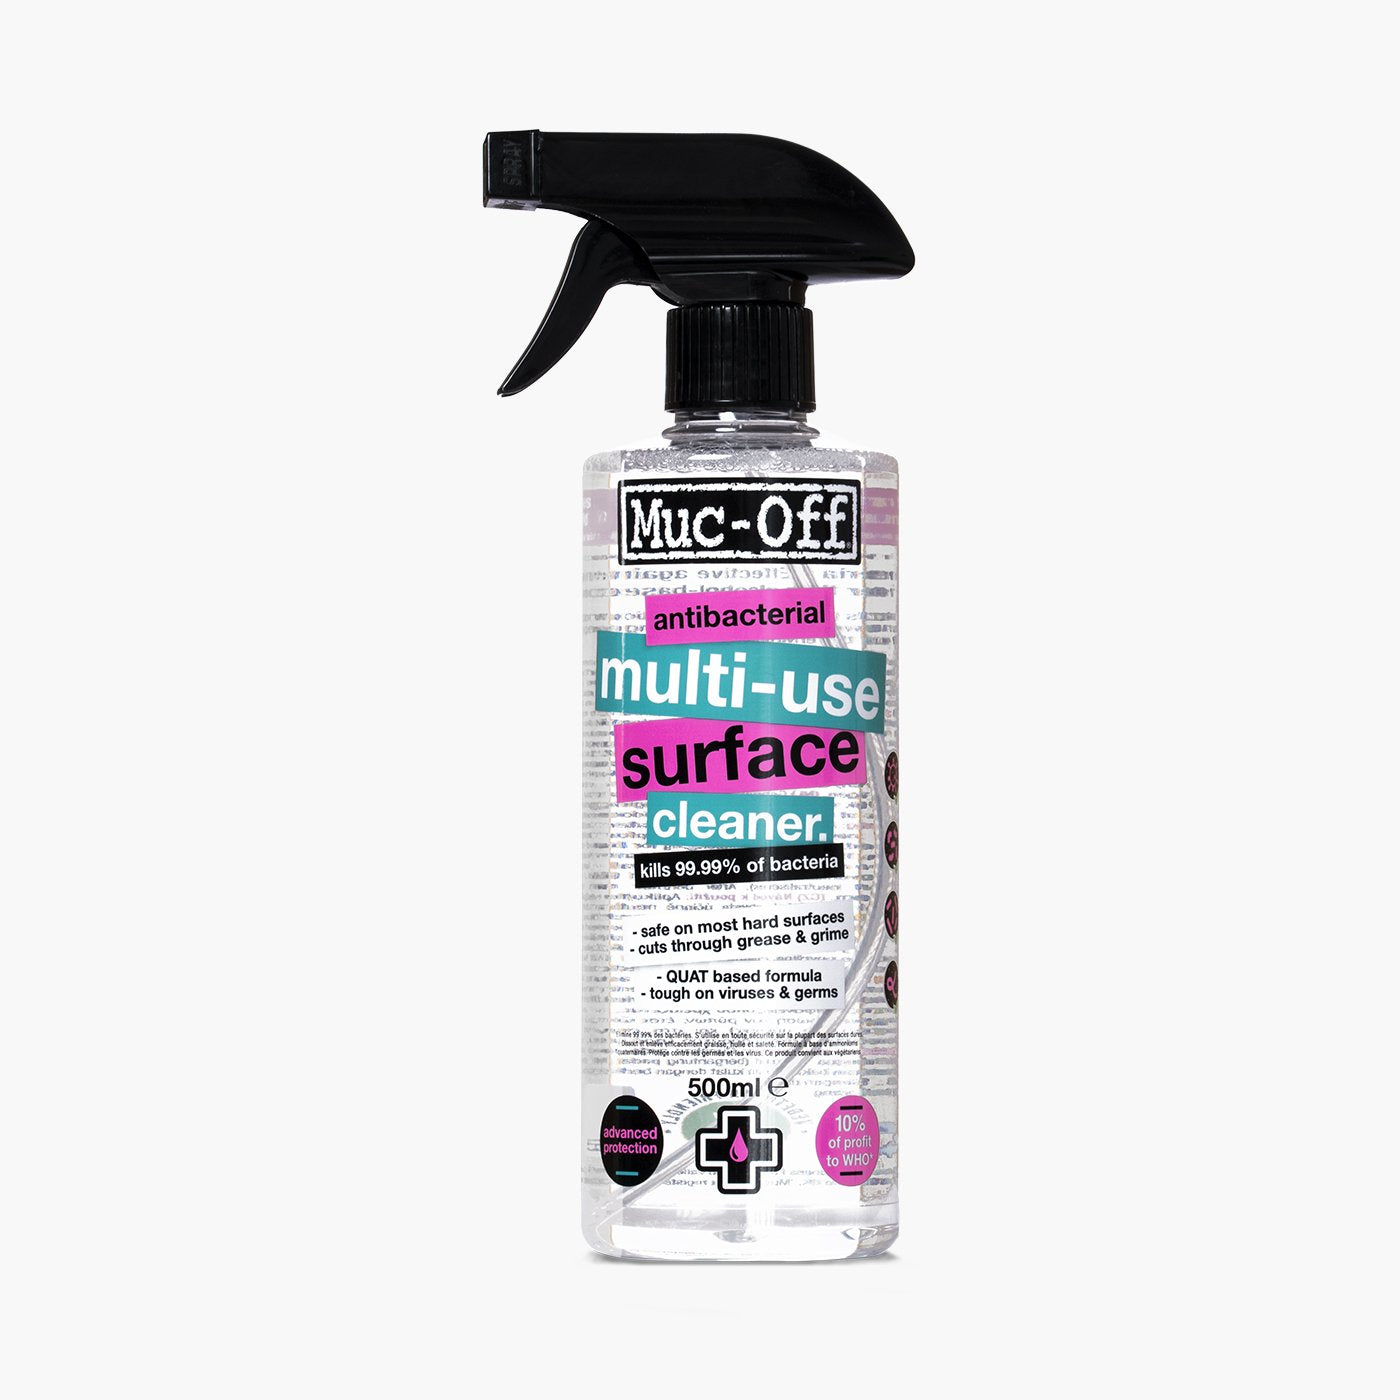 Muc-Off Antibacterial Multi Use Surface Cleaner - 500ml 500 ml